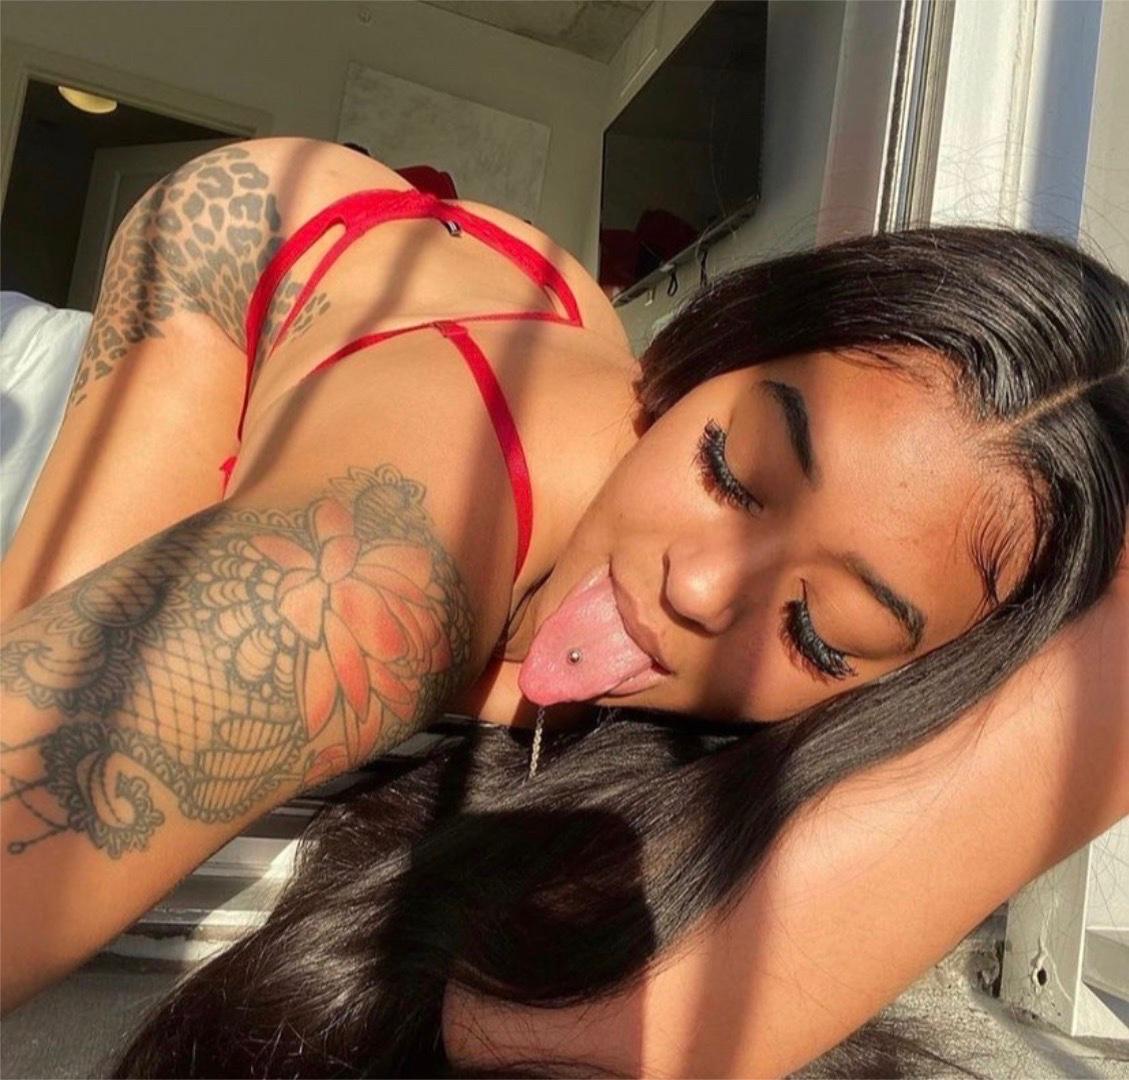 I’m Judy 👅🍆🍑💋I’ll squirt 💦 and ready for fun I’m available anytime 🥰😍❤️